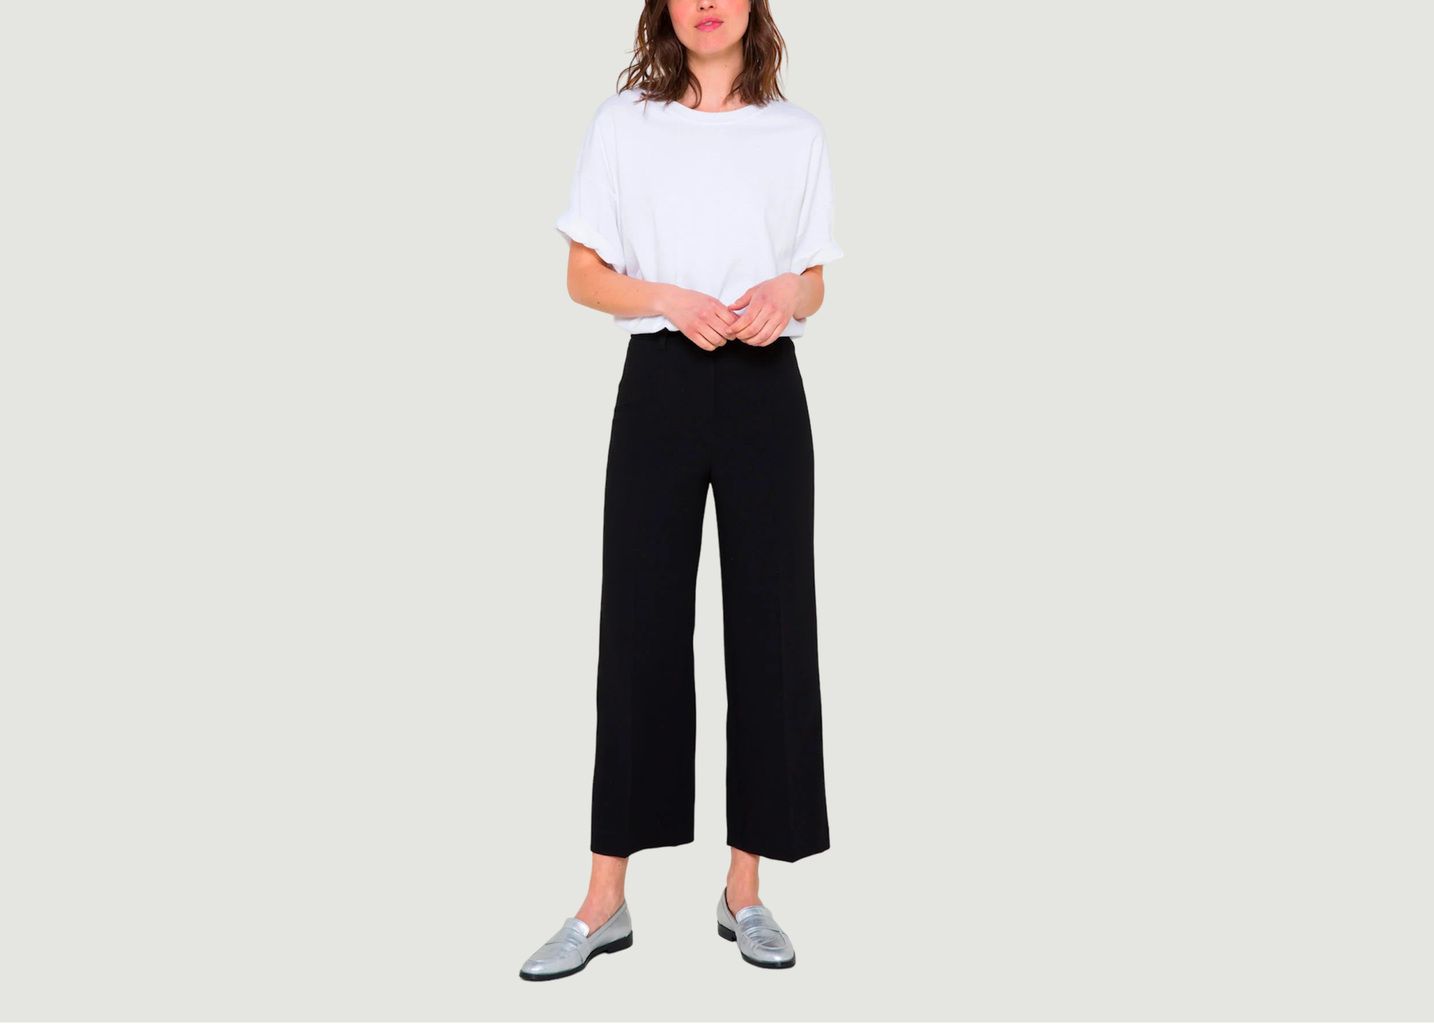 Modetrotter Alessandro Tequila Pants